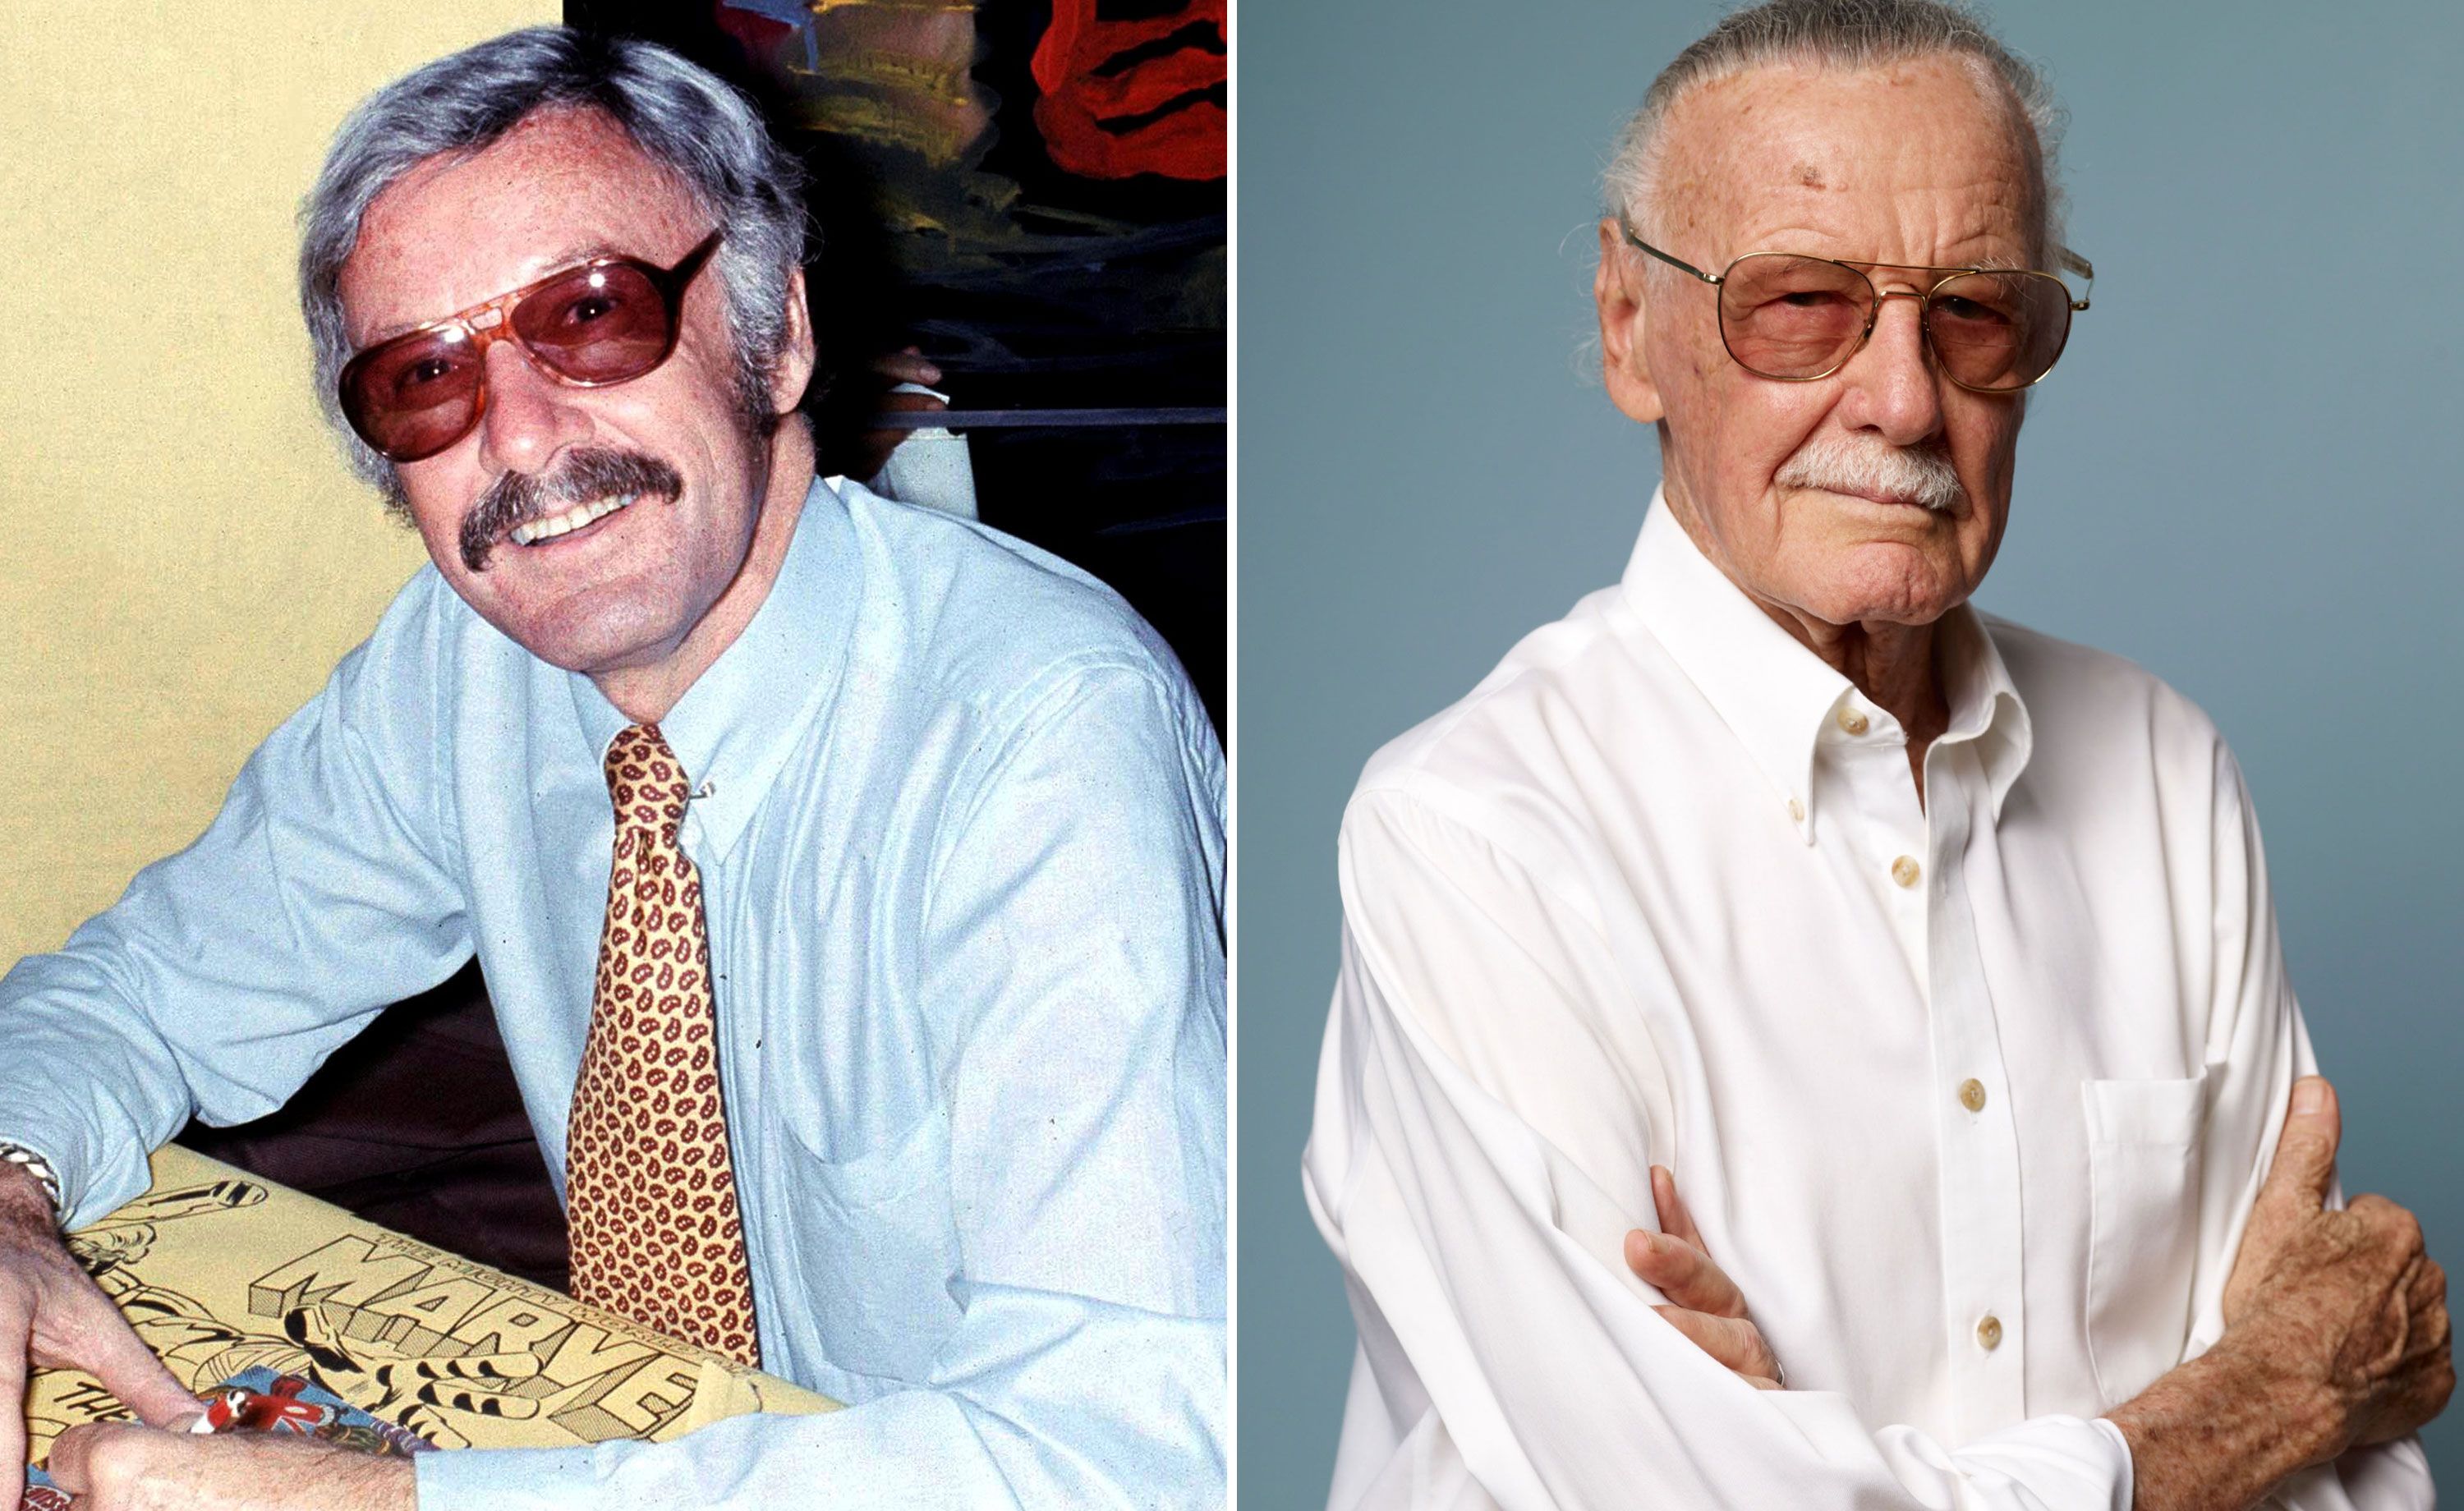 Marvel legend Stan Lee – a life in pictures